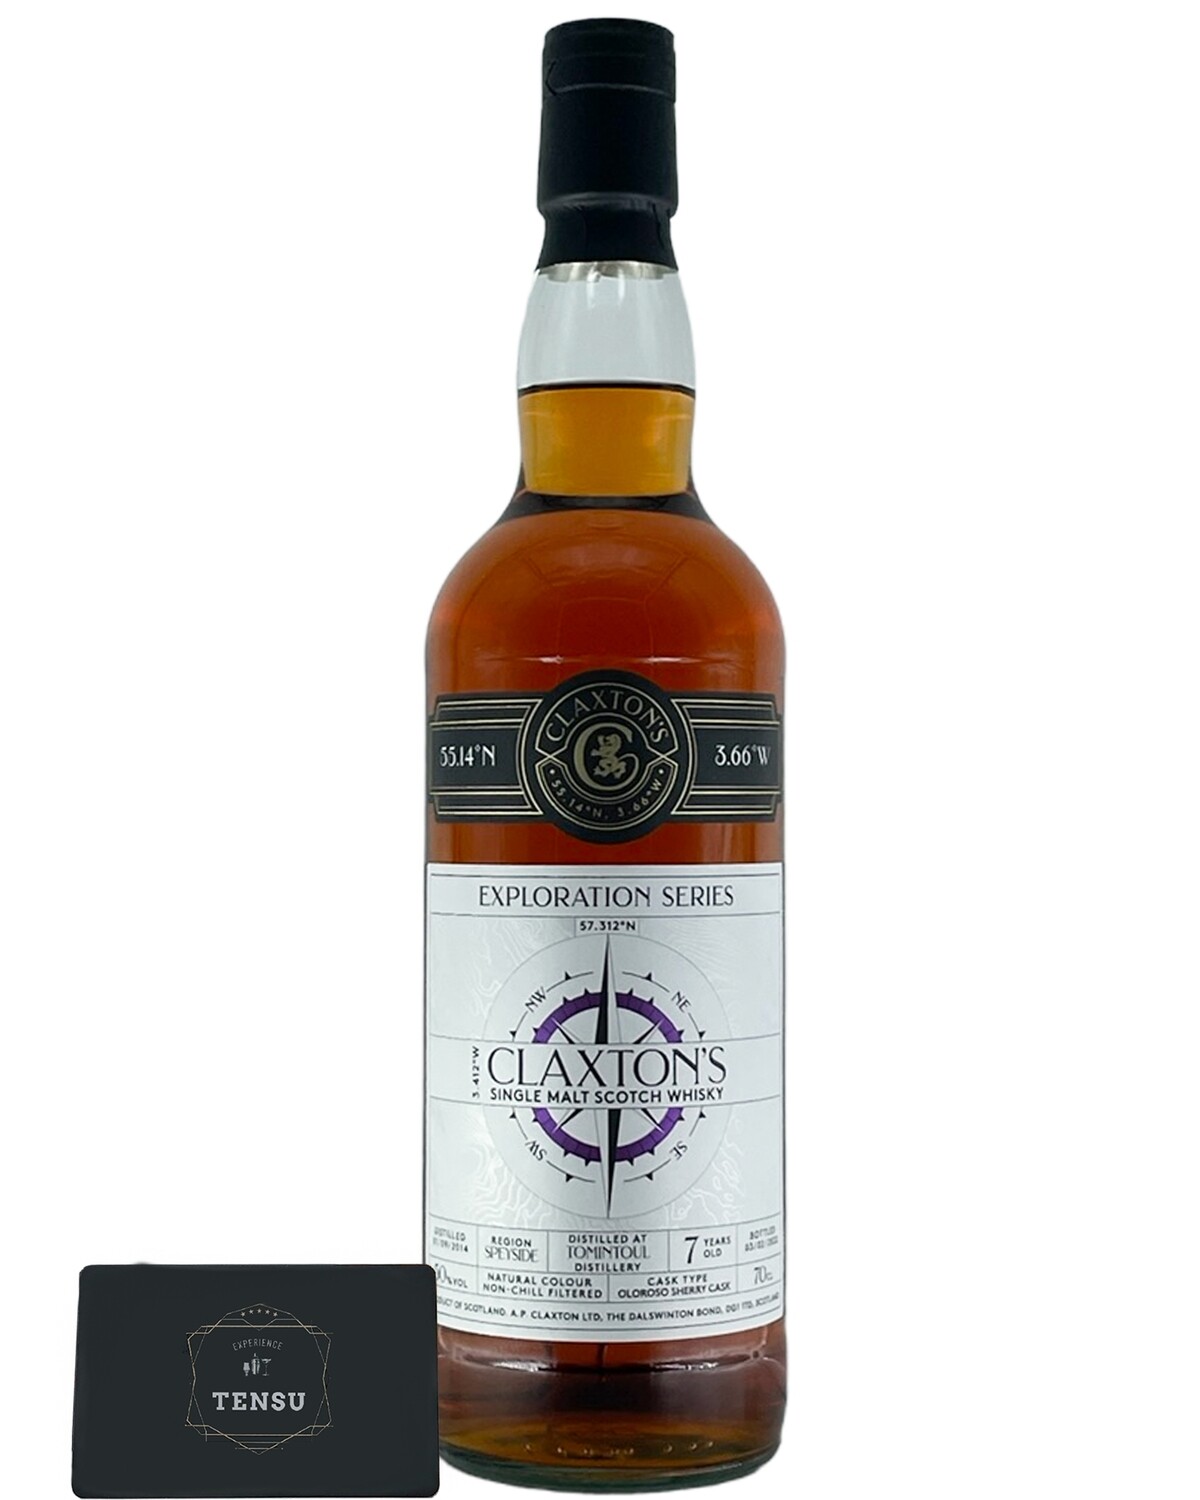 Tomintoul 7Y - Exploration Series (2014-2022) Oloroso Sherry Cask 50.0 "Claxton's"